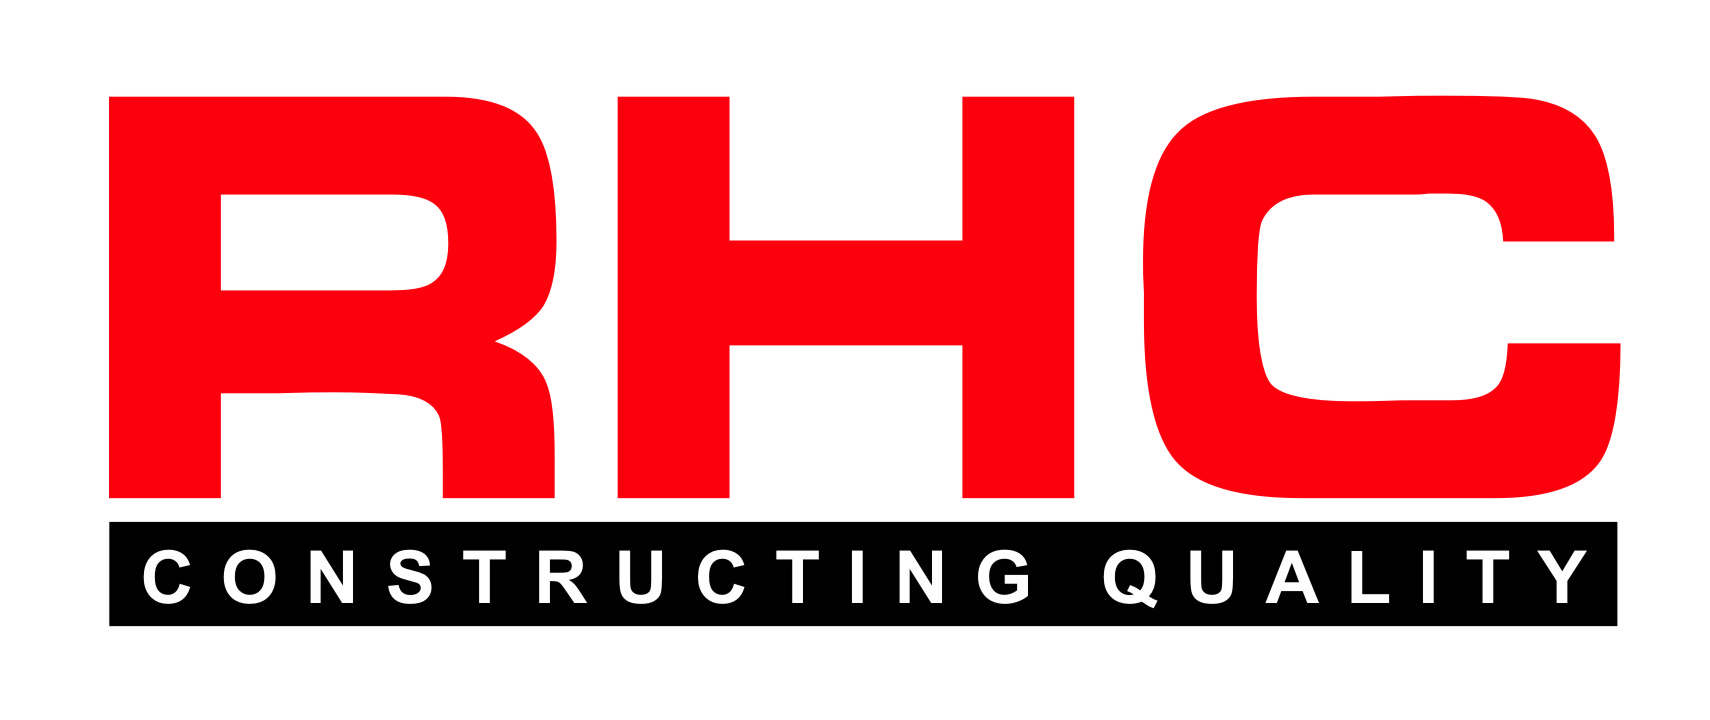 RHC Continues To Offer Turn-Key Construction Services to Oil & Gas Industry